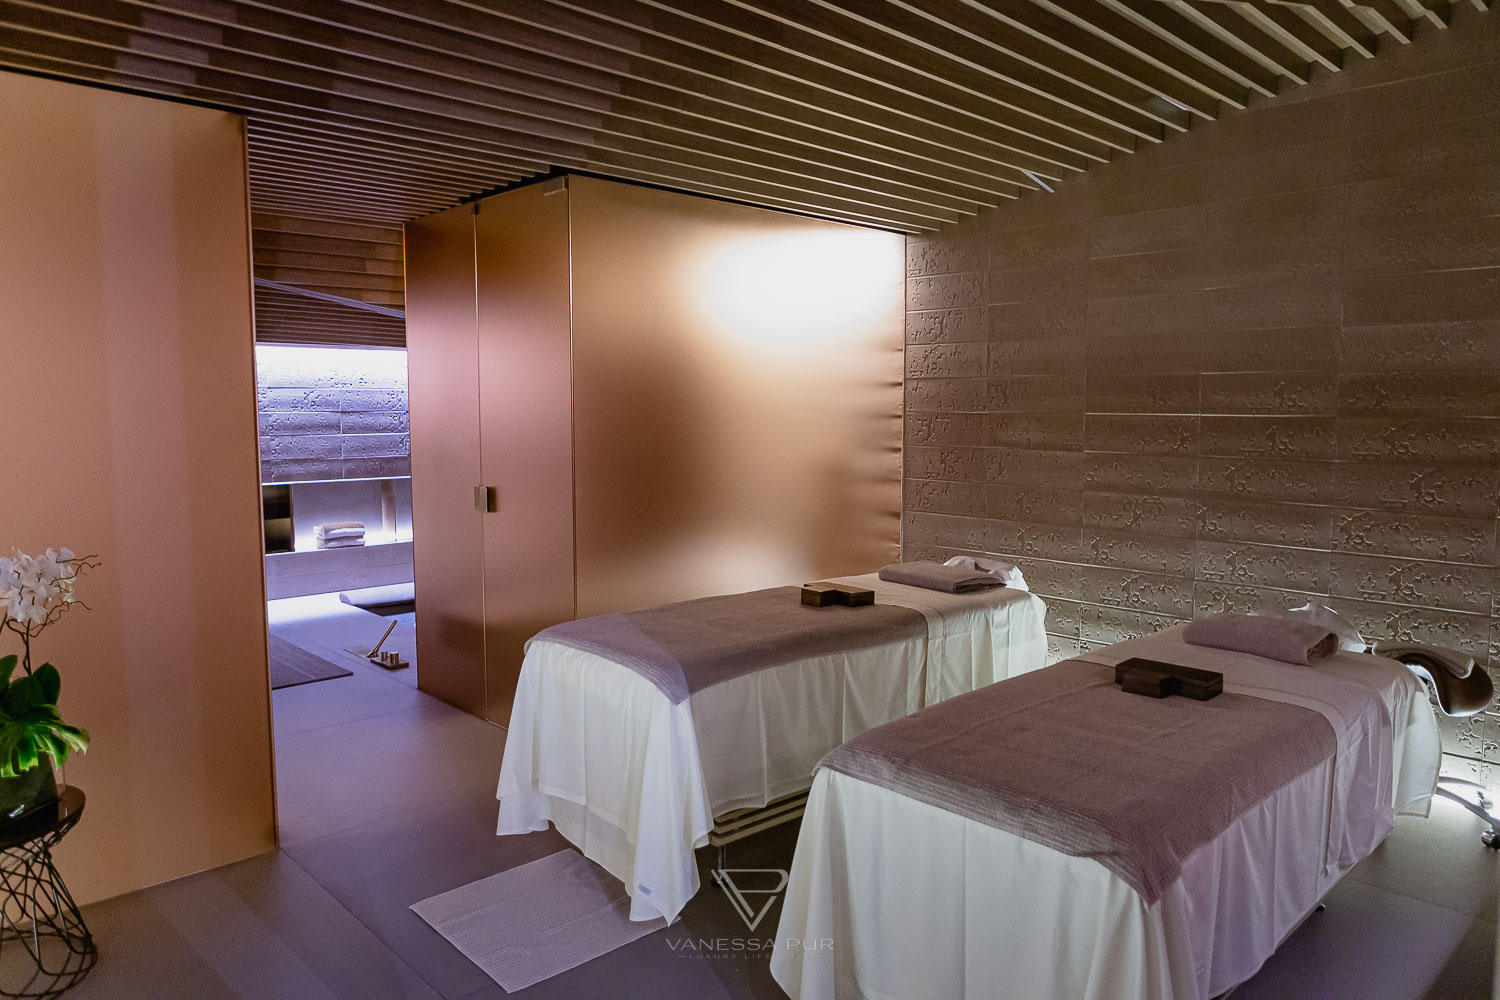 Spa Four Seasons Hotel Milan - Luxury Wellness - Wellness in Milan, Italy - Four Seasons Spa - Massage, rest and relaxation.